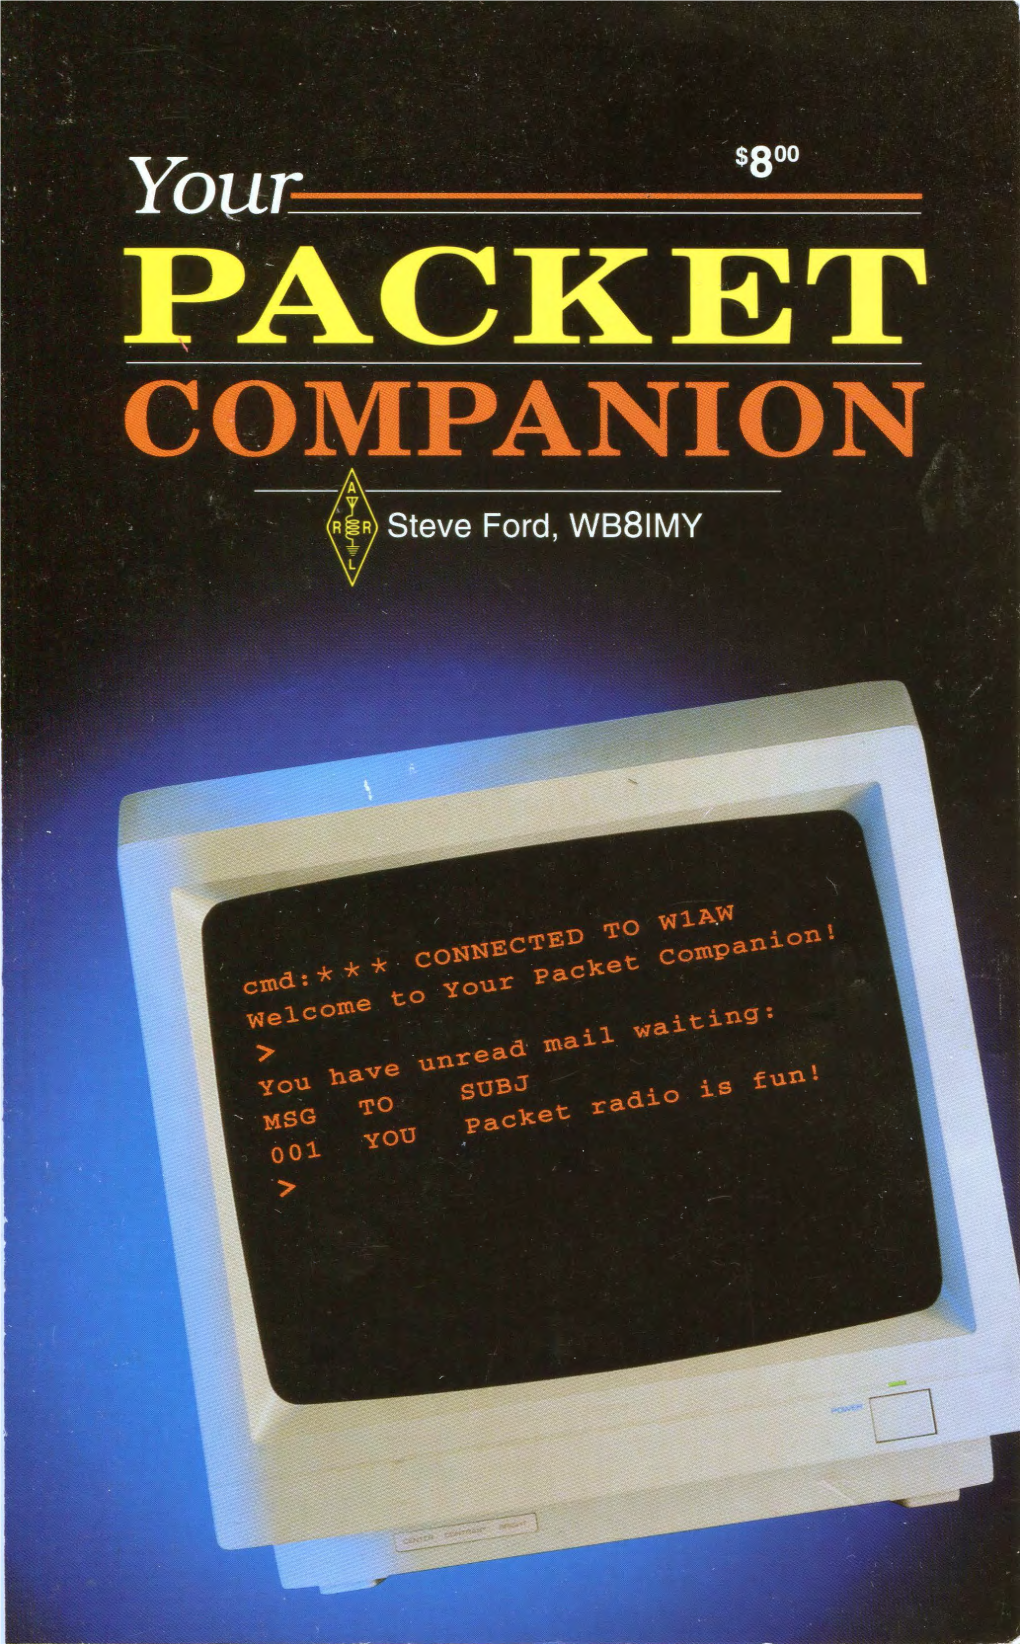 Your Packet Companion ISBN 0-87259-395-9